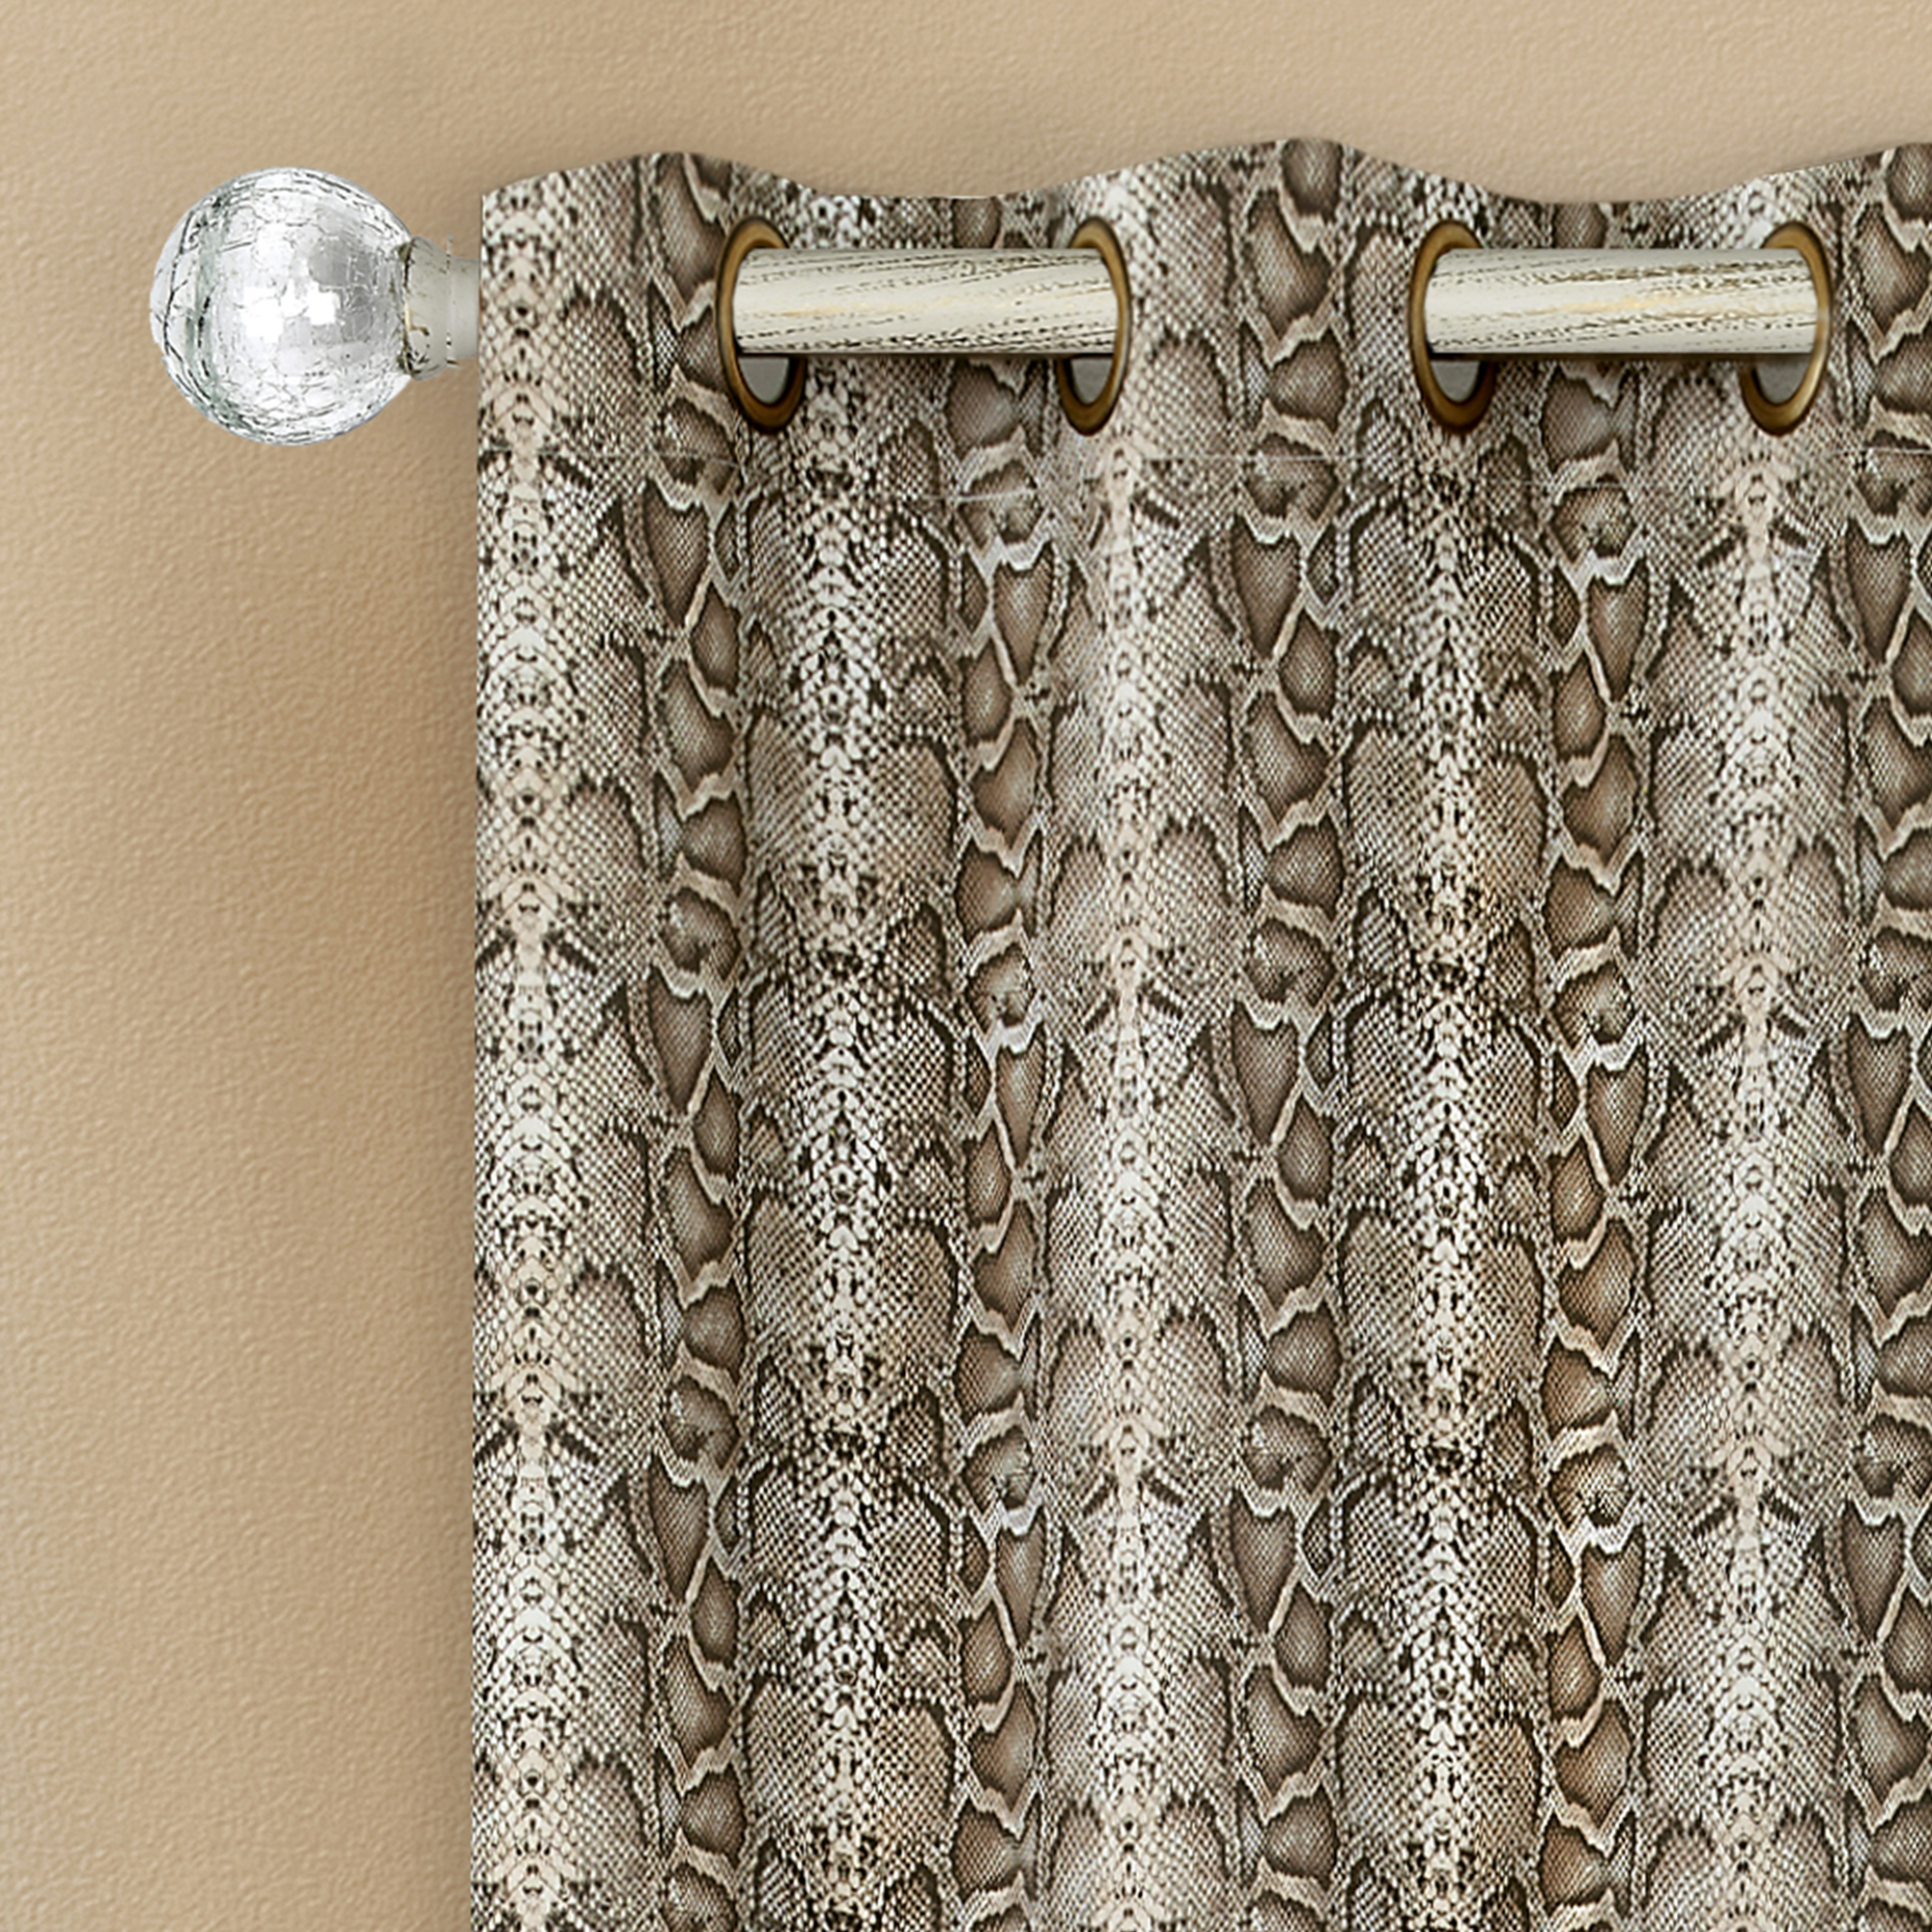 Achim Python Polyester Blackout Window Curtain Panel, Brown/Gold, 52" x 63" - image 5 of 5